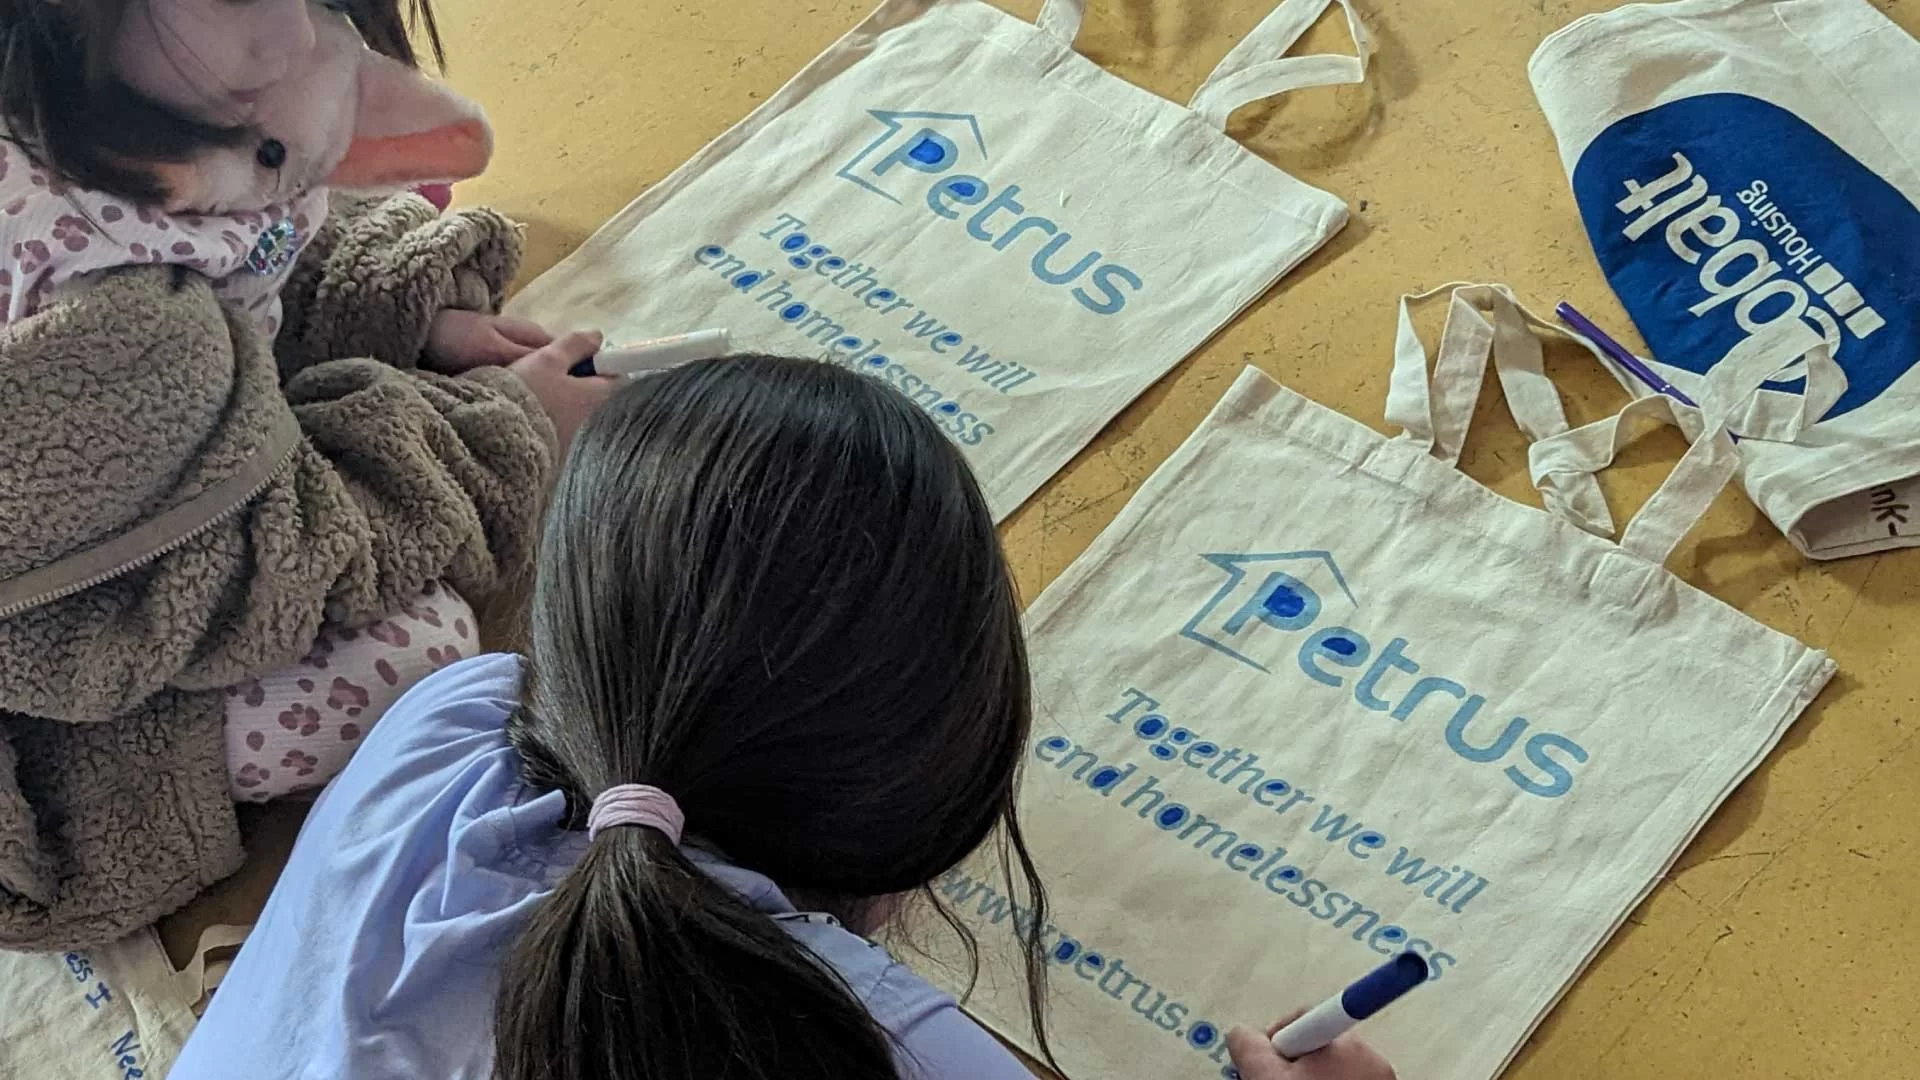 Sleep. out to help out event, image of two young pupils drawing on a Petrus canvas bag to make it look prettier